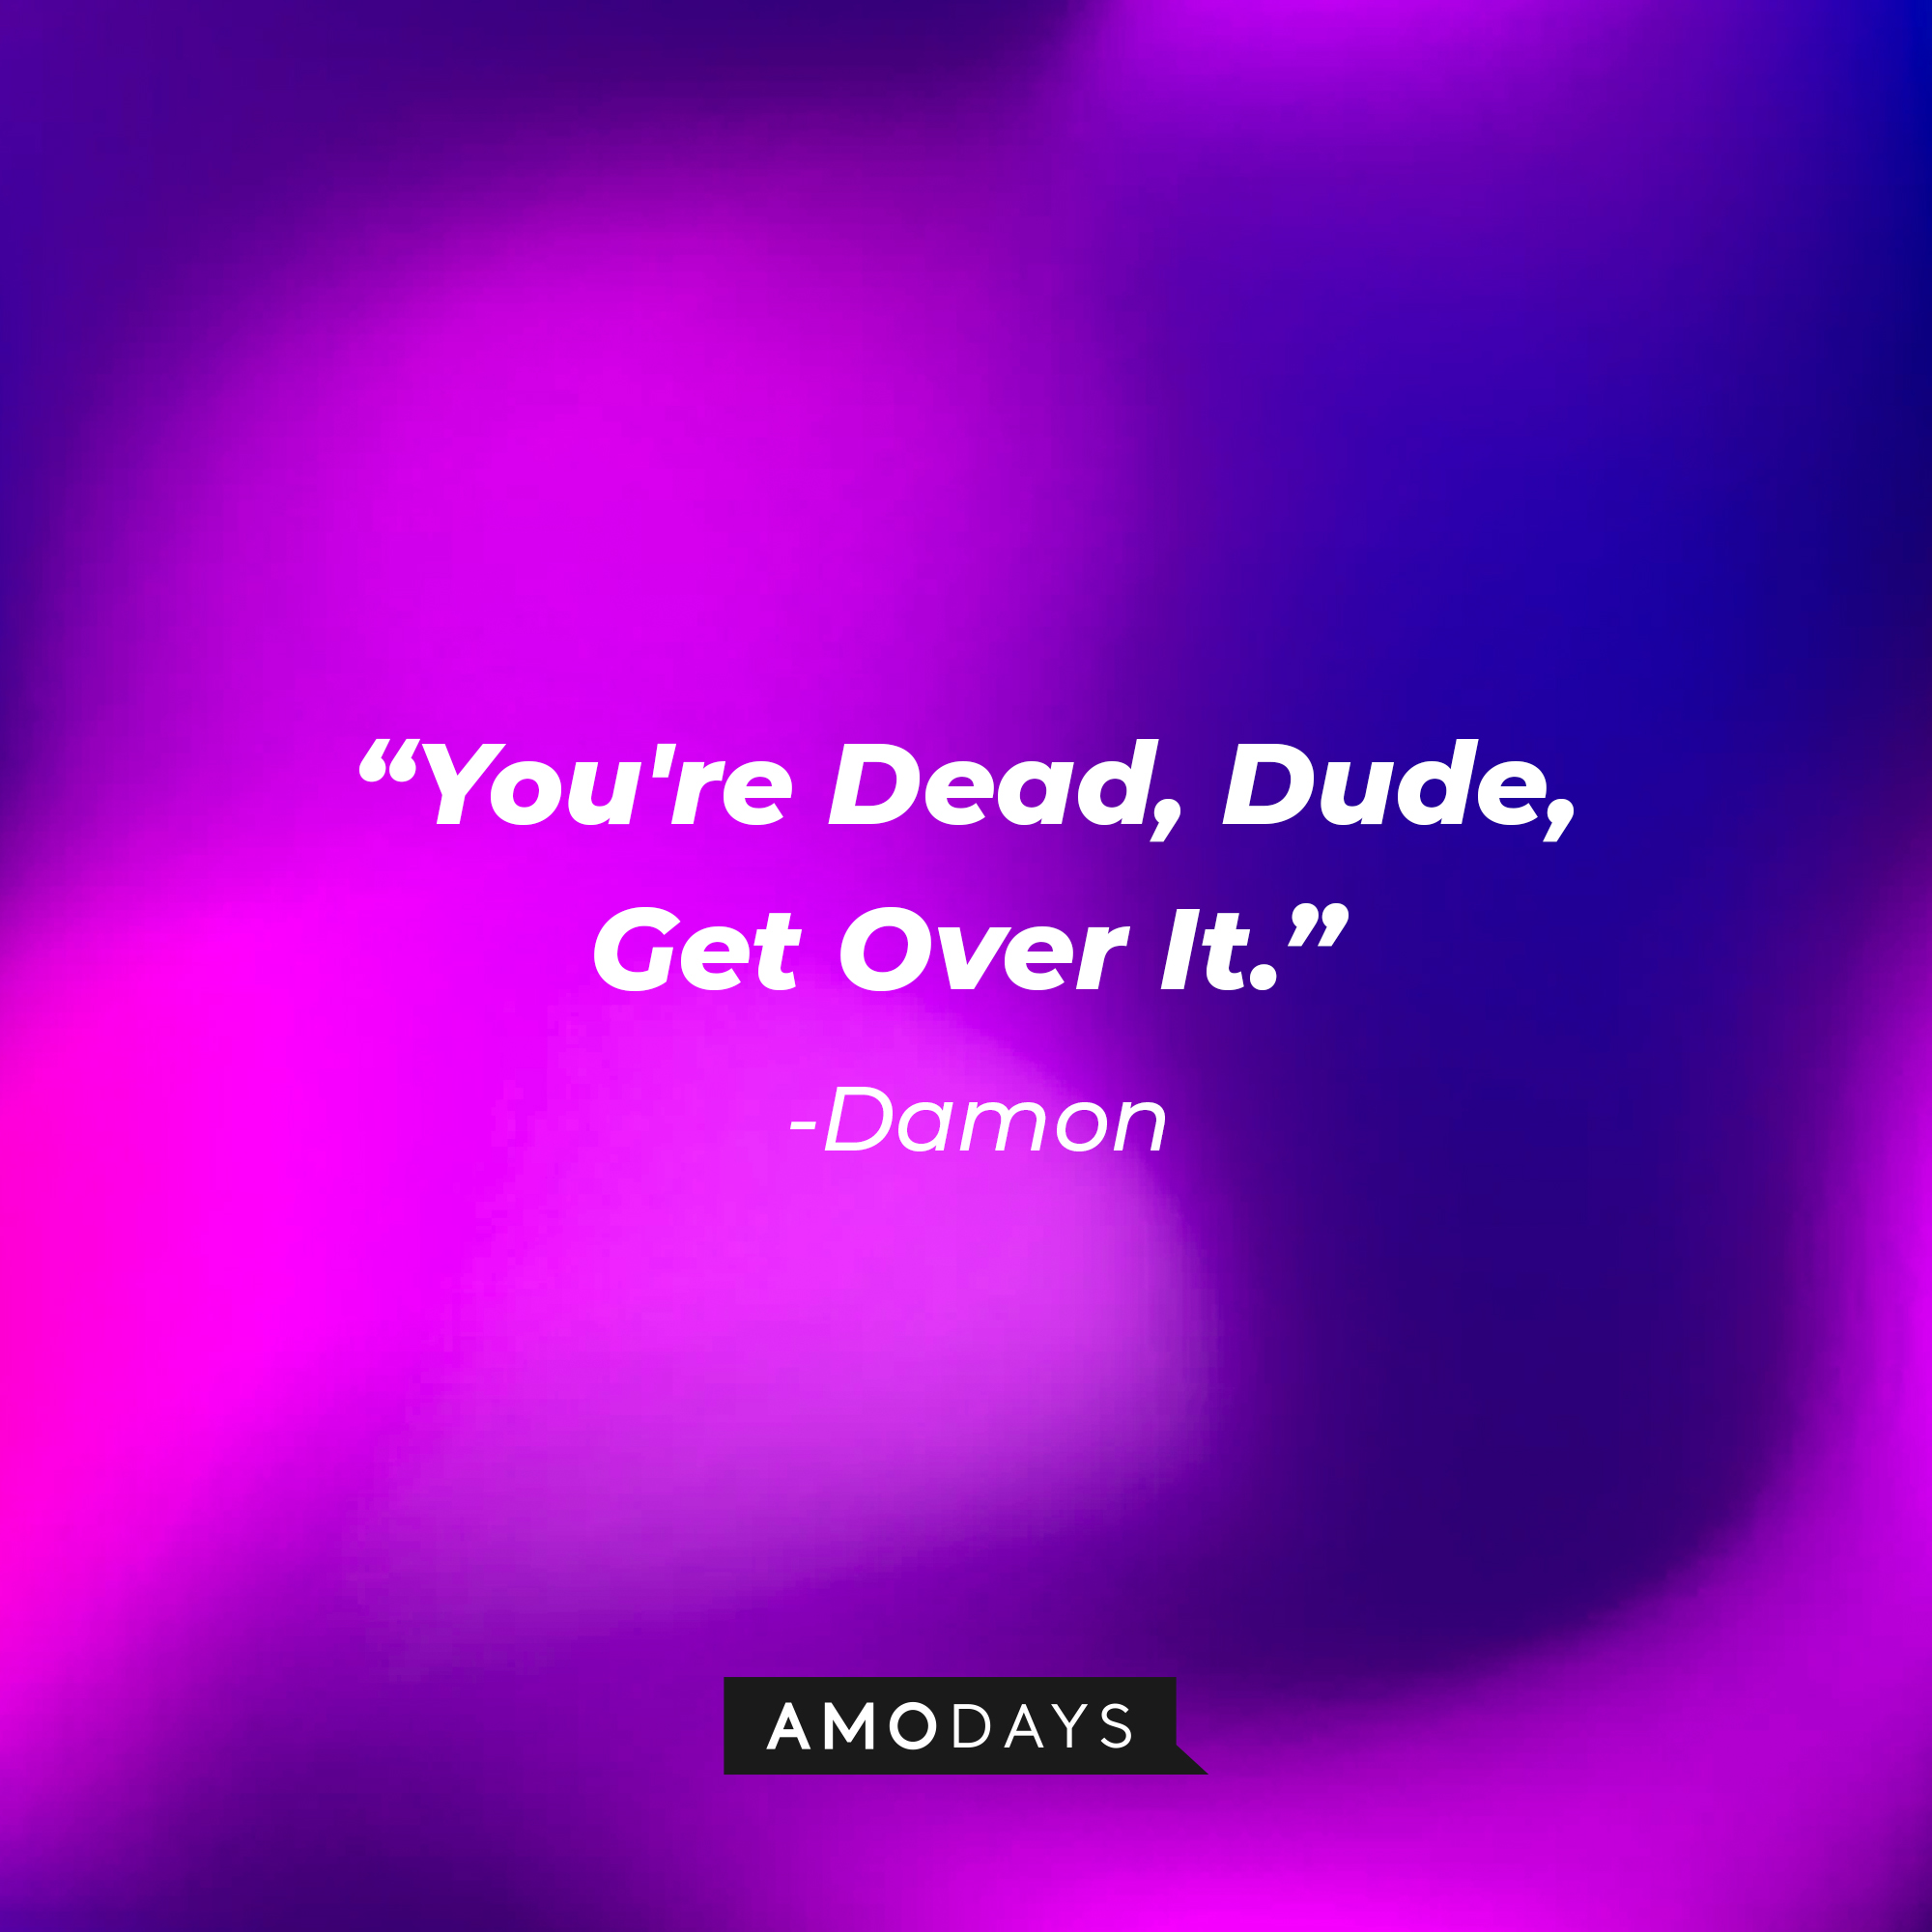 Damon's quote: "You're Dead, Dude, Get Over It." | Source: Amodays